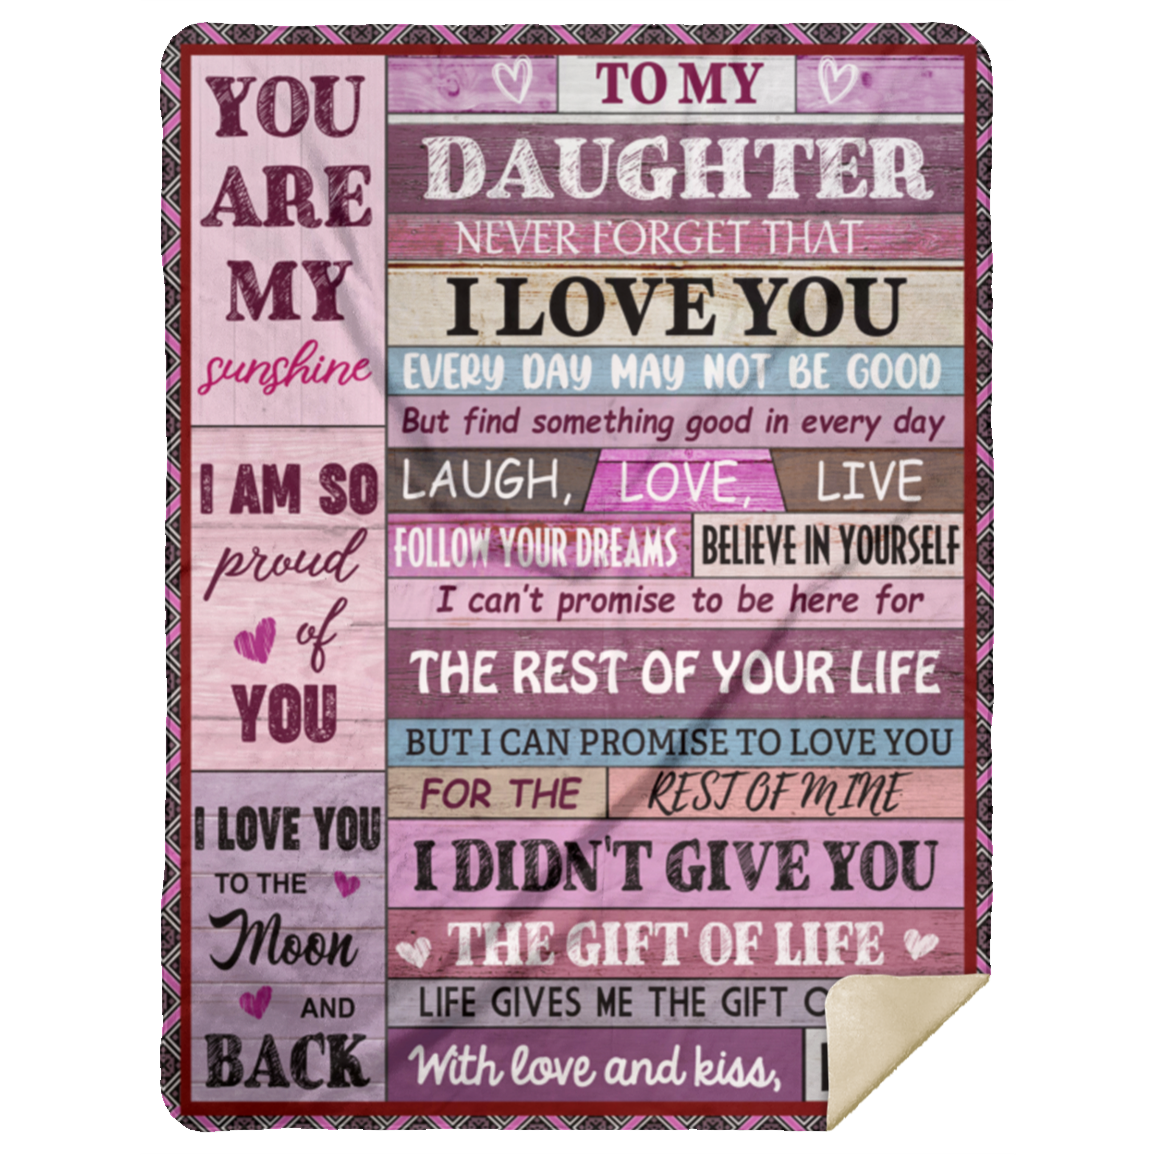 TO MY DAUGHTER FROM MOM| NEVER FORGET THAT I LOVE YOU| Premium Plush Blanket